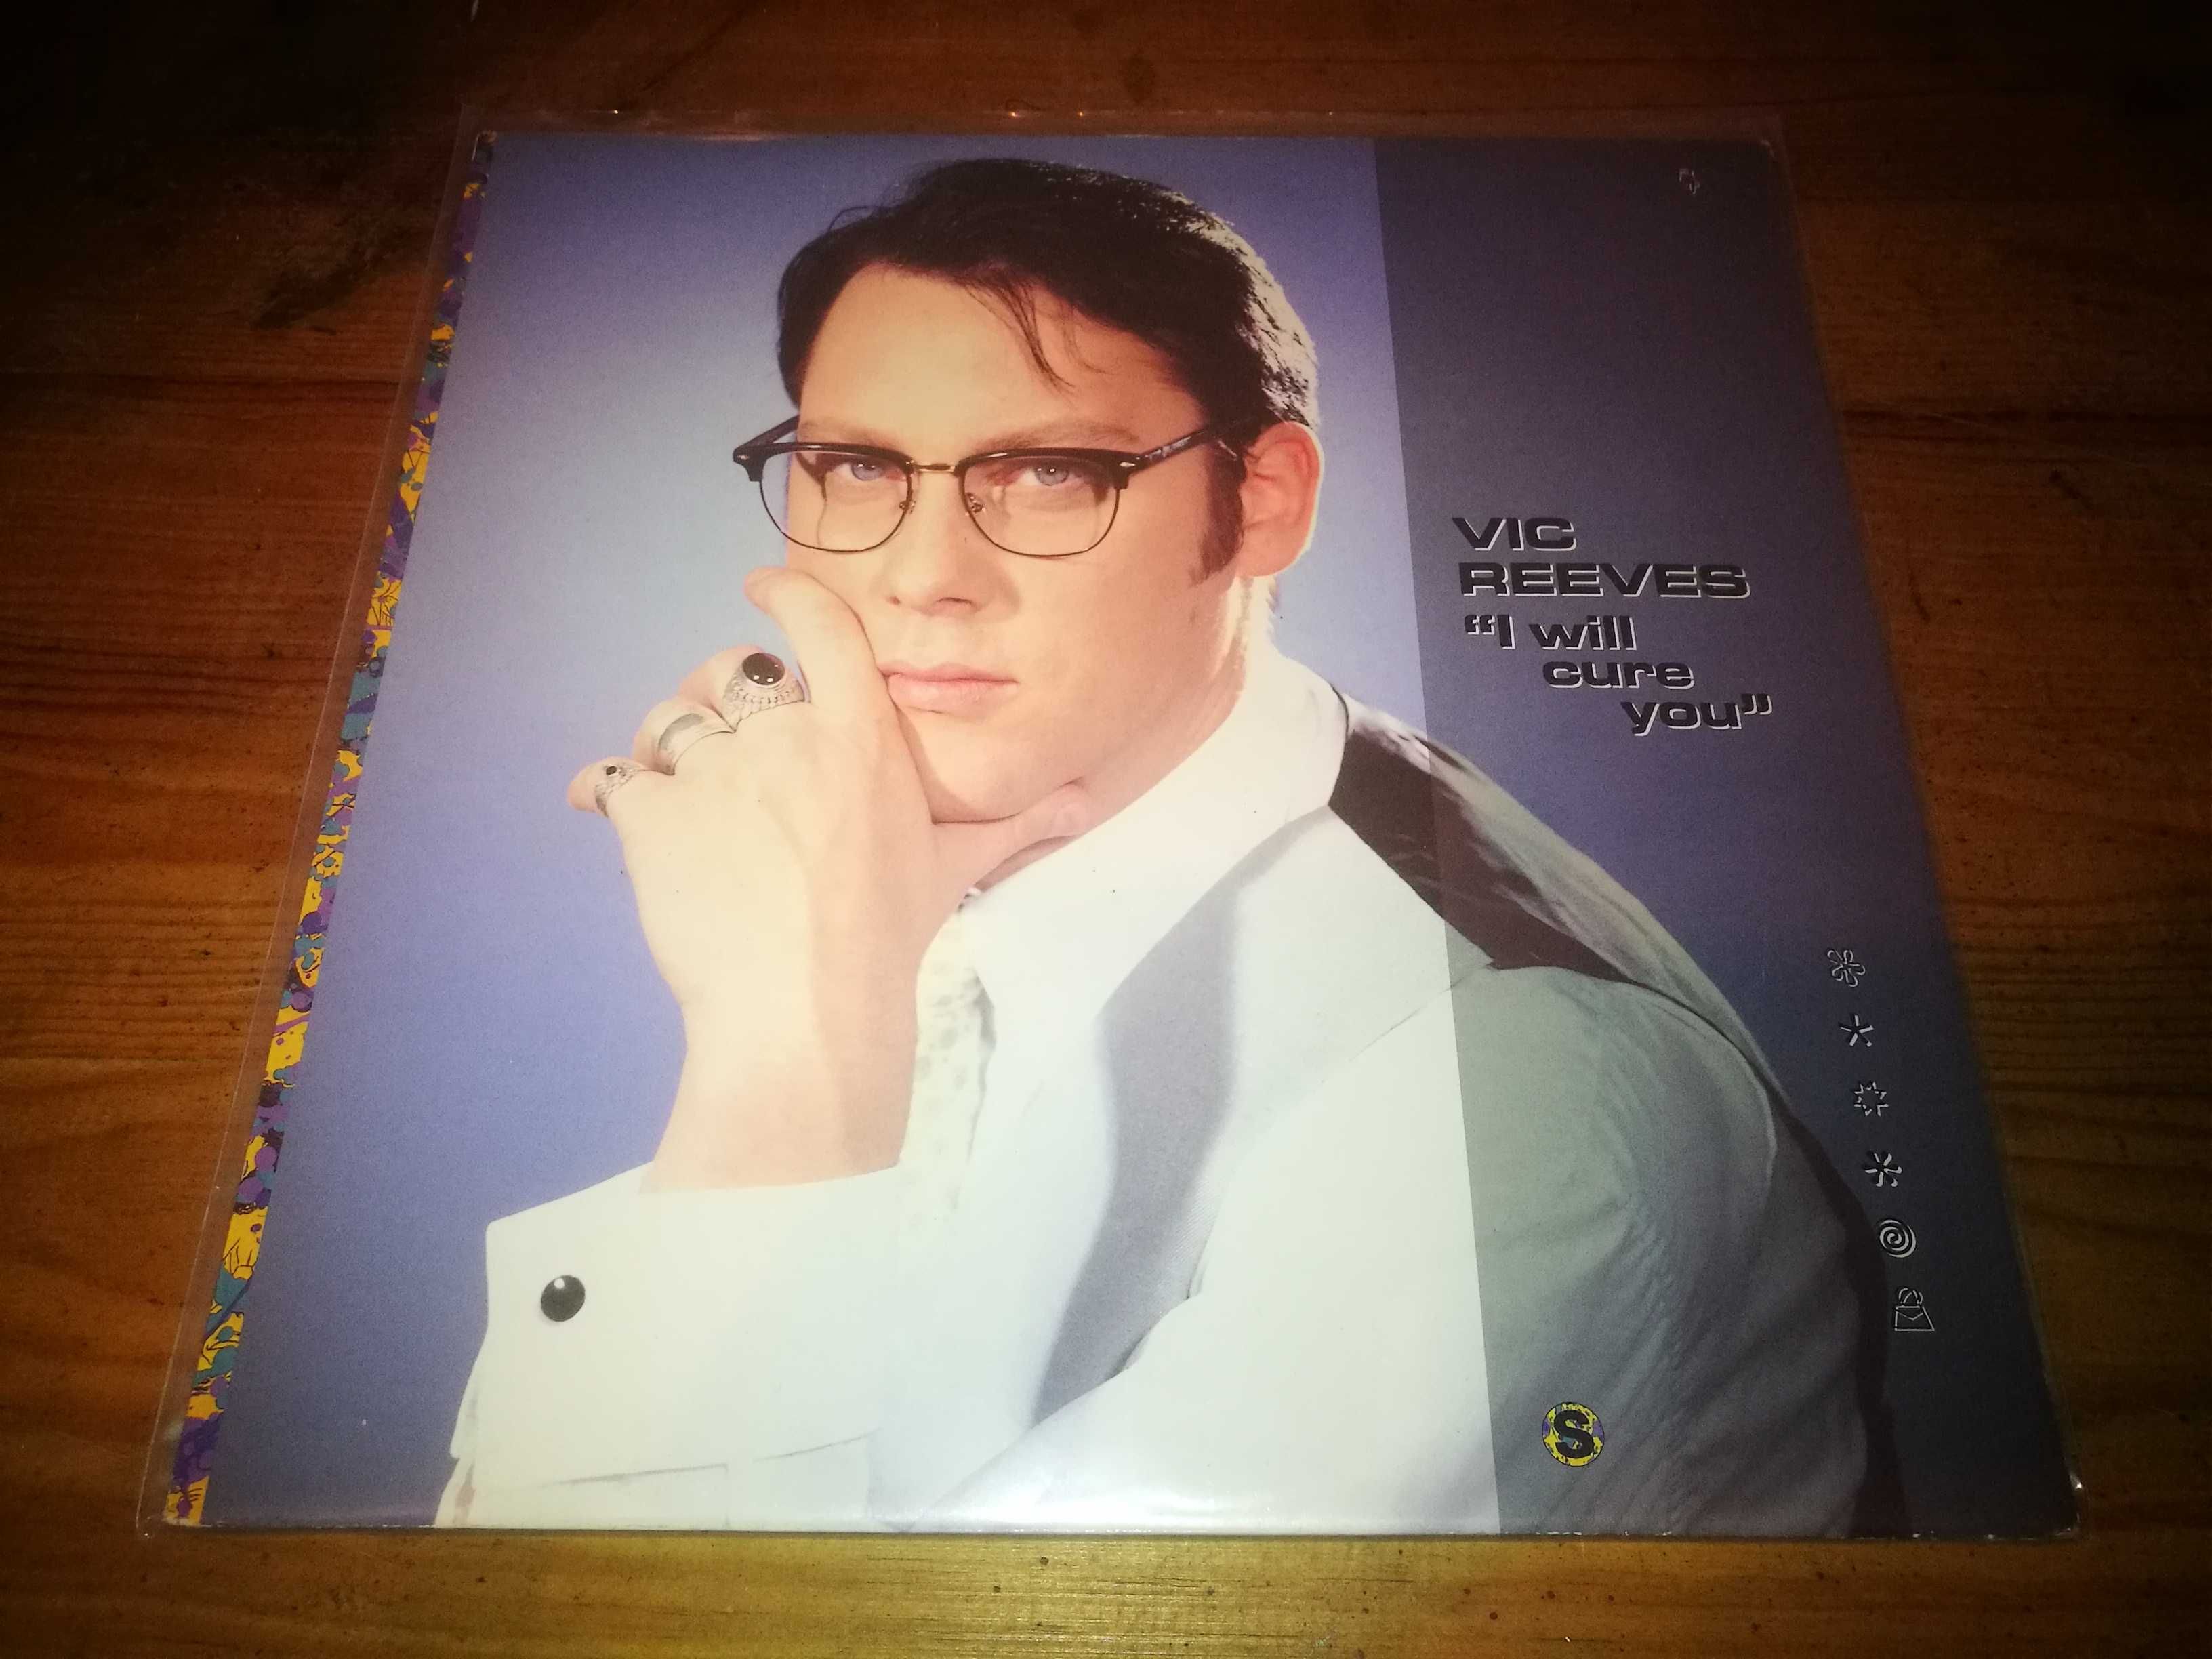 VIC   REEVES - “I Will Cure You” LP